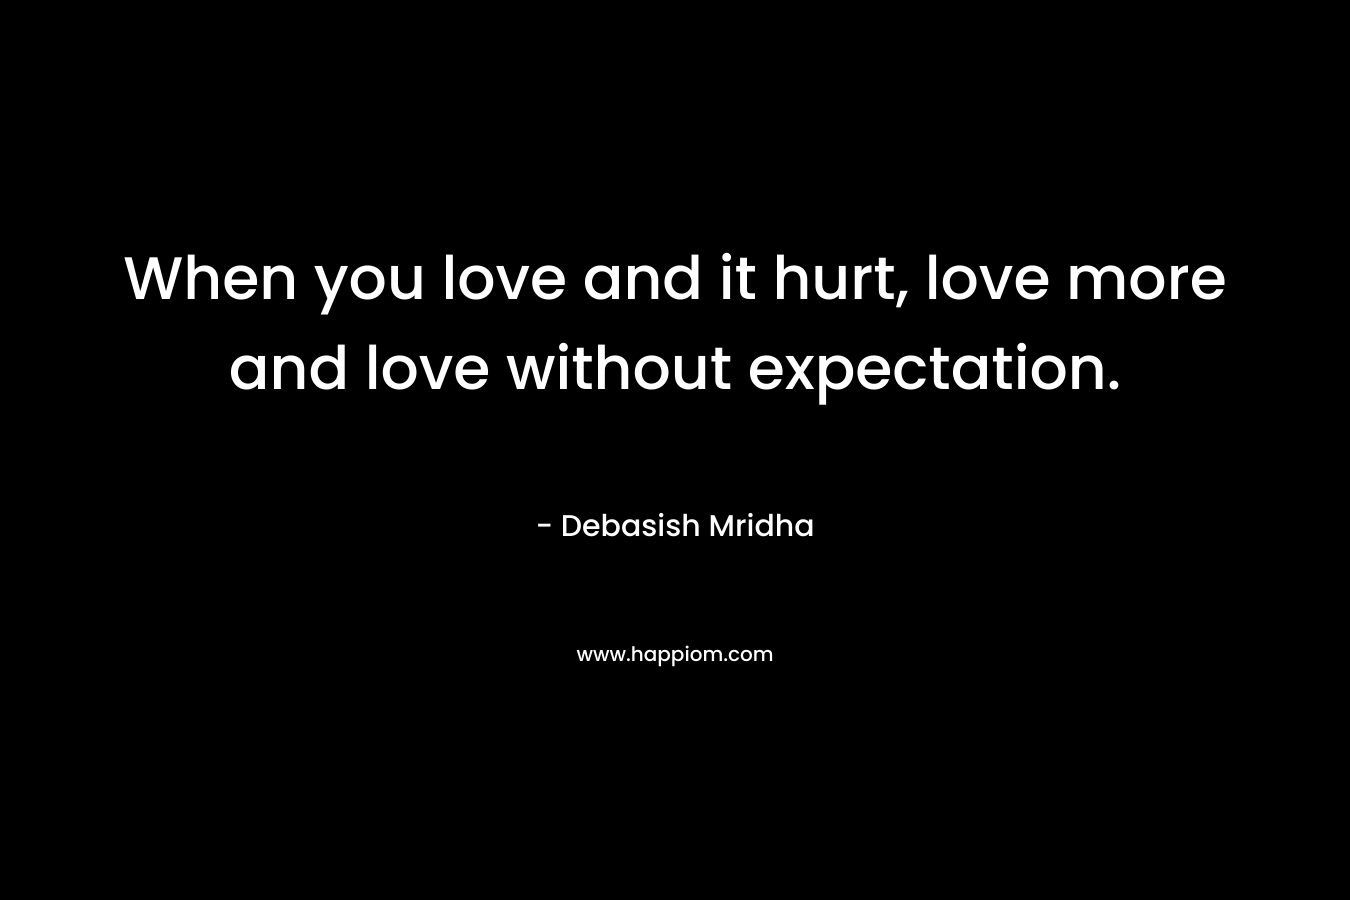 When you love and it hurt, love more and love without expectation.